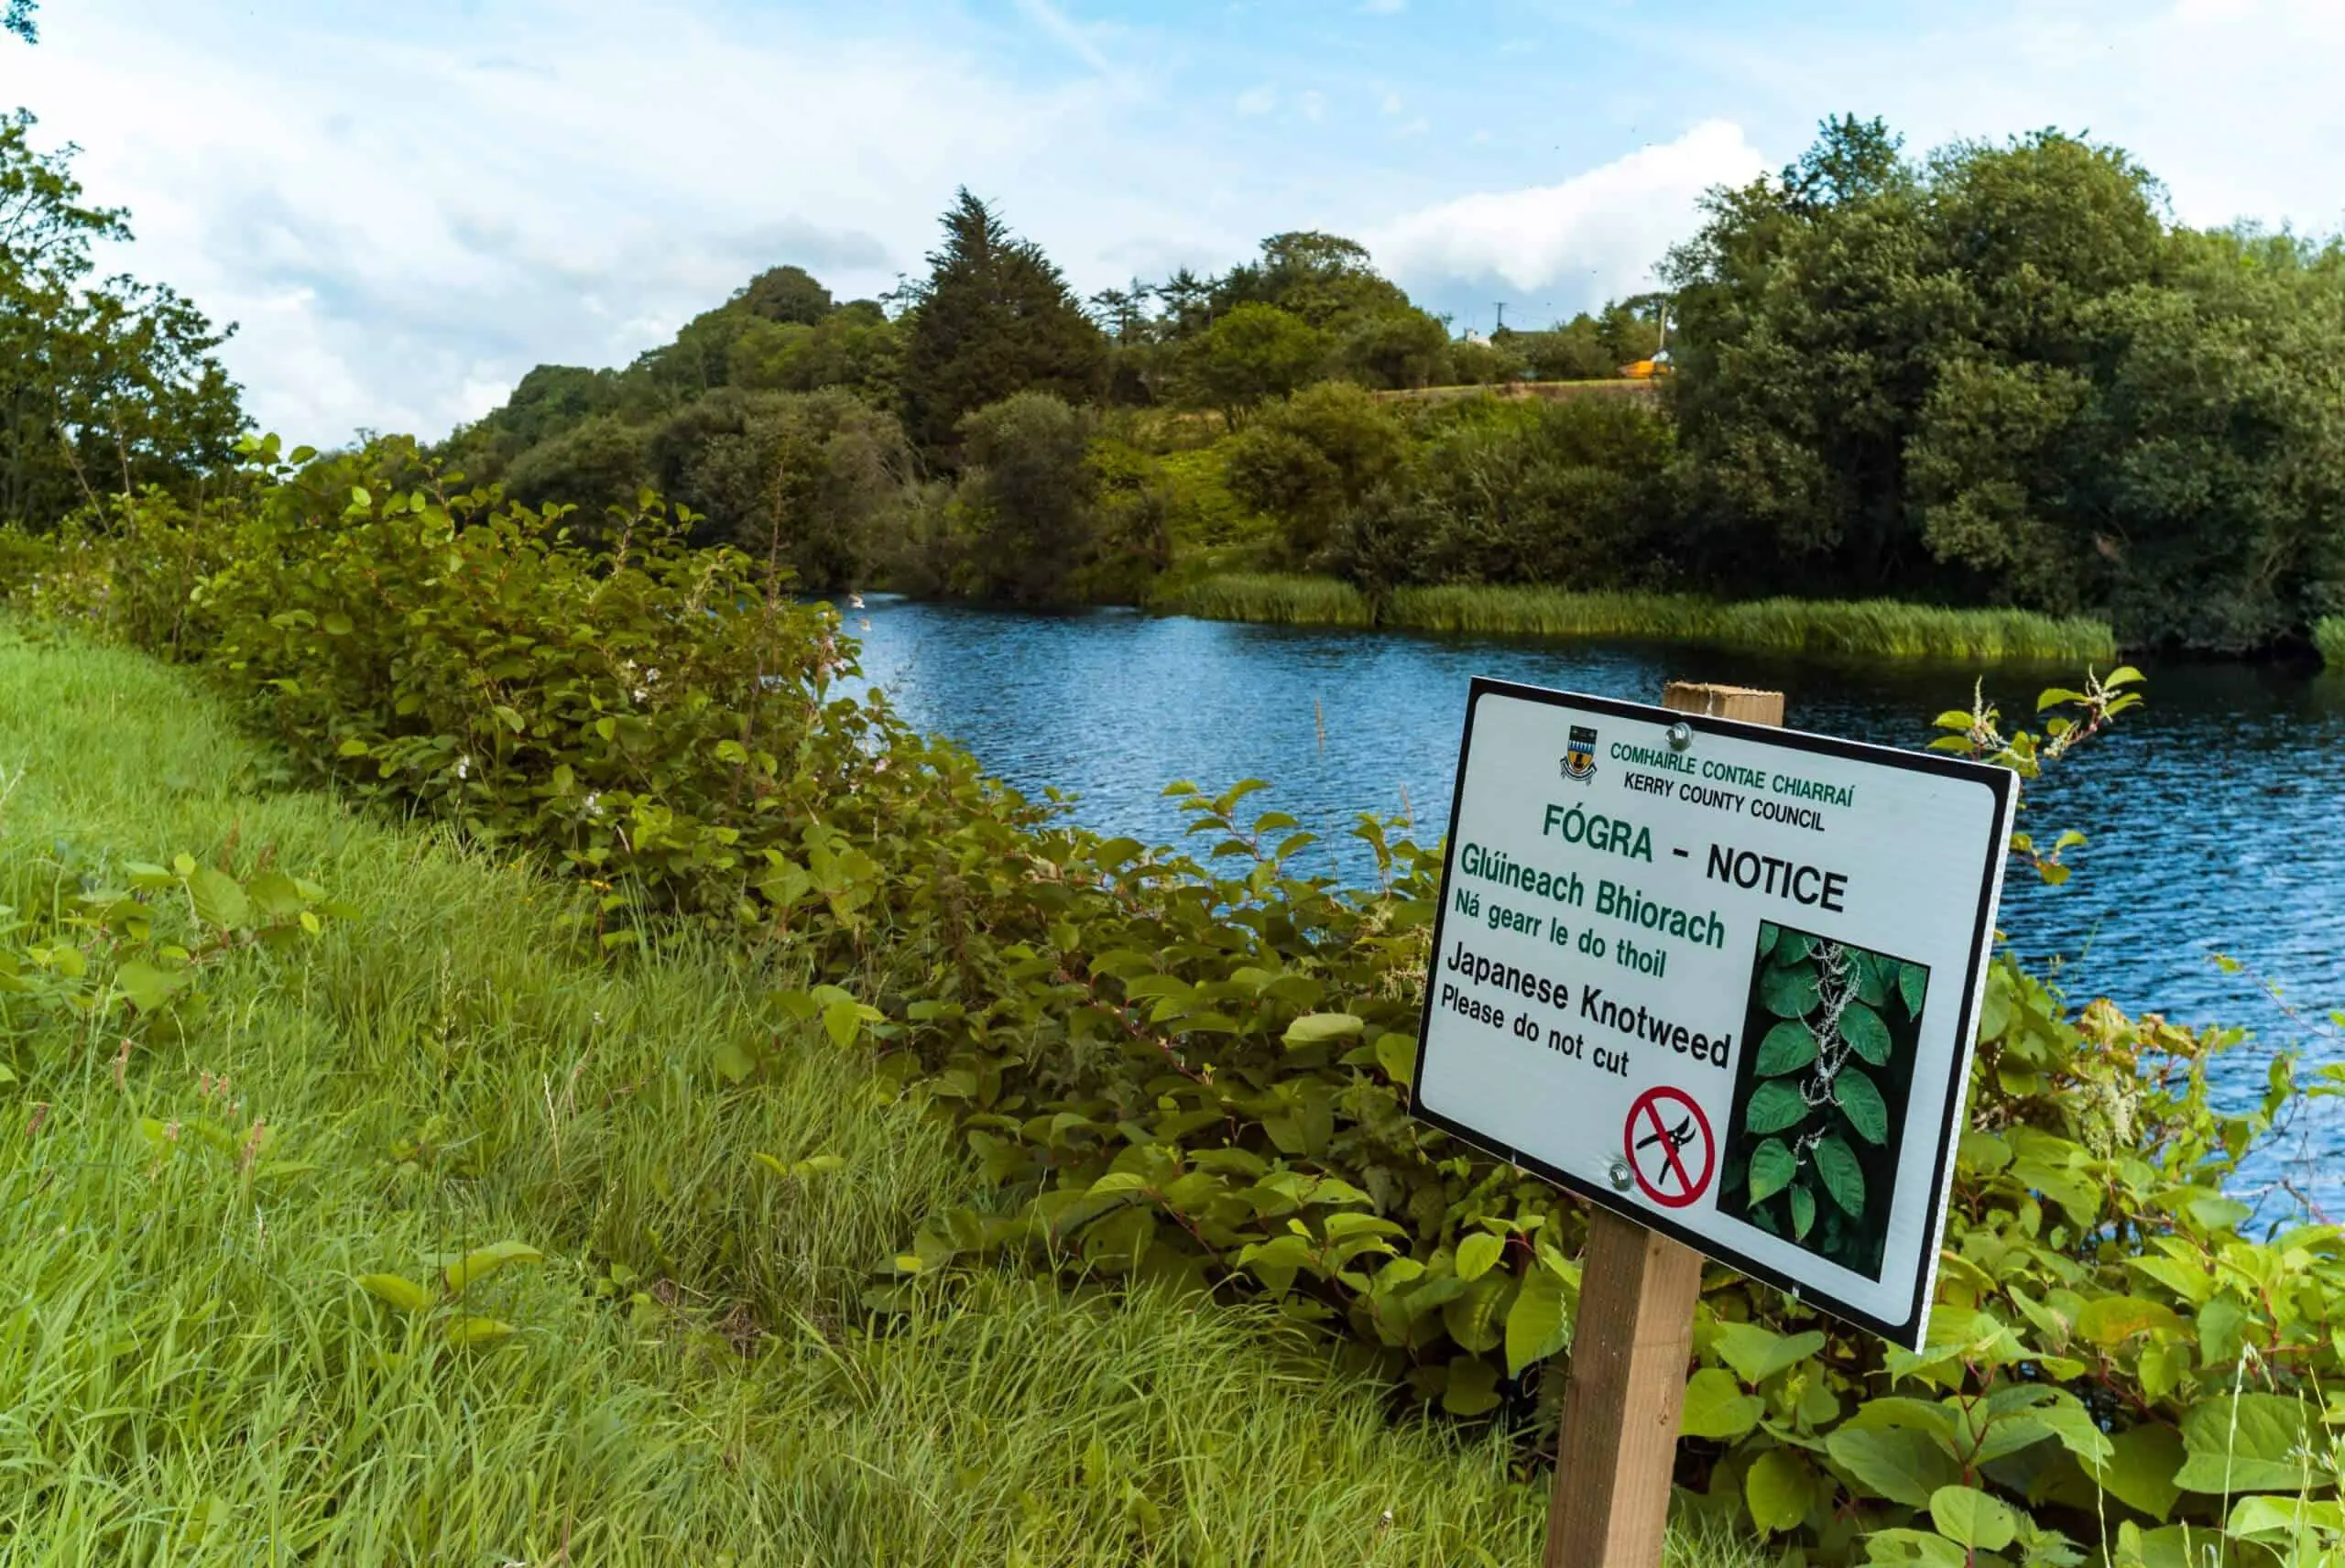 Waterways suffer from this invasive weed and change our landscape dramatically